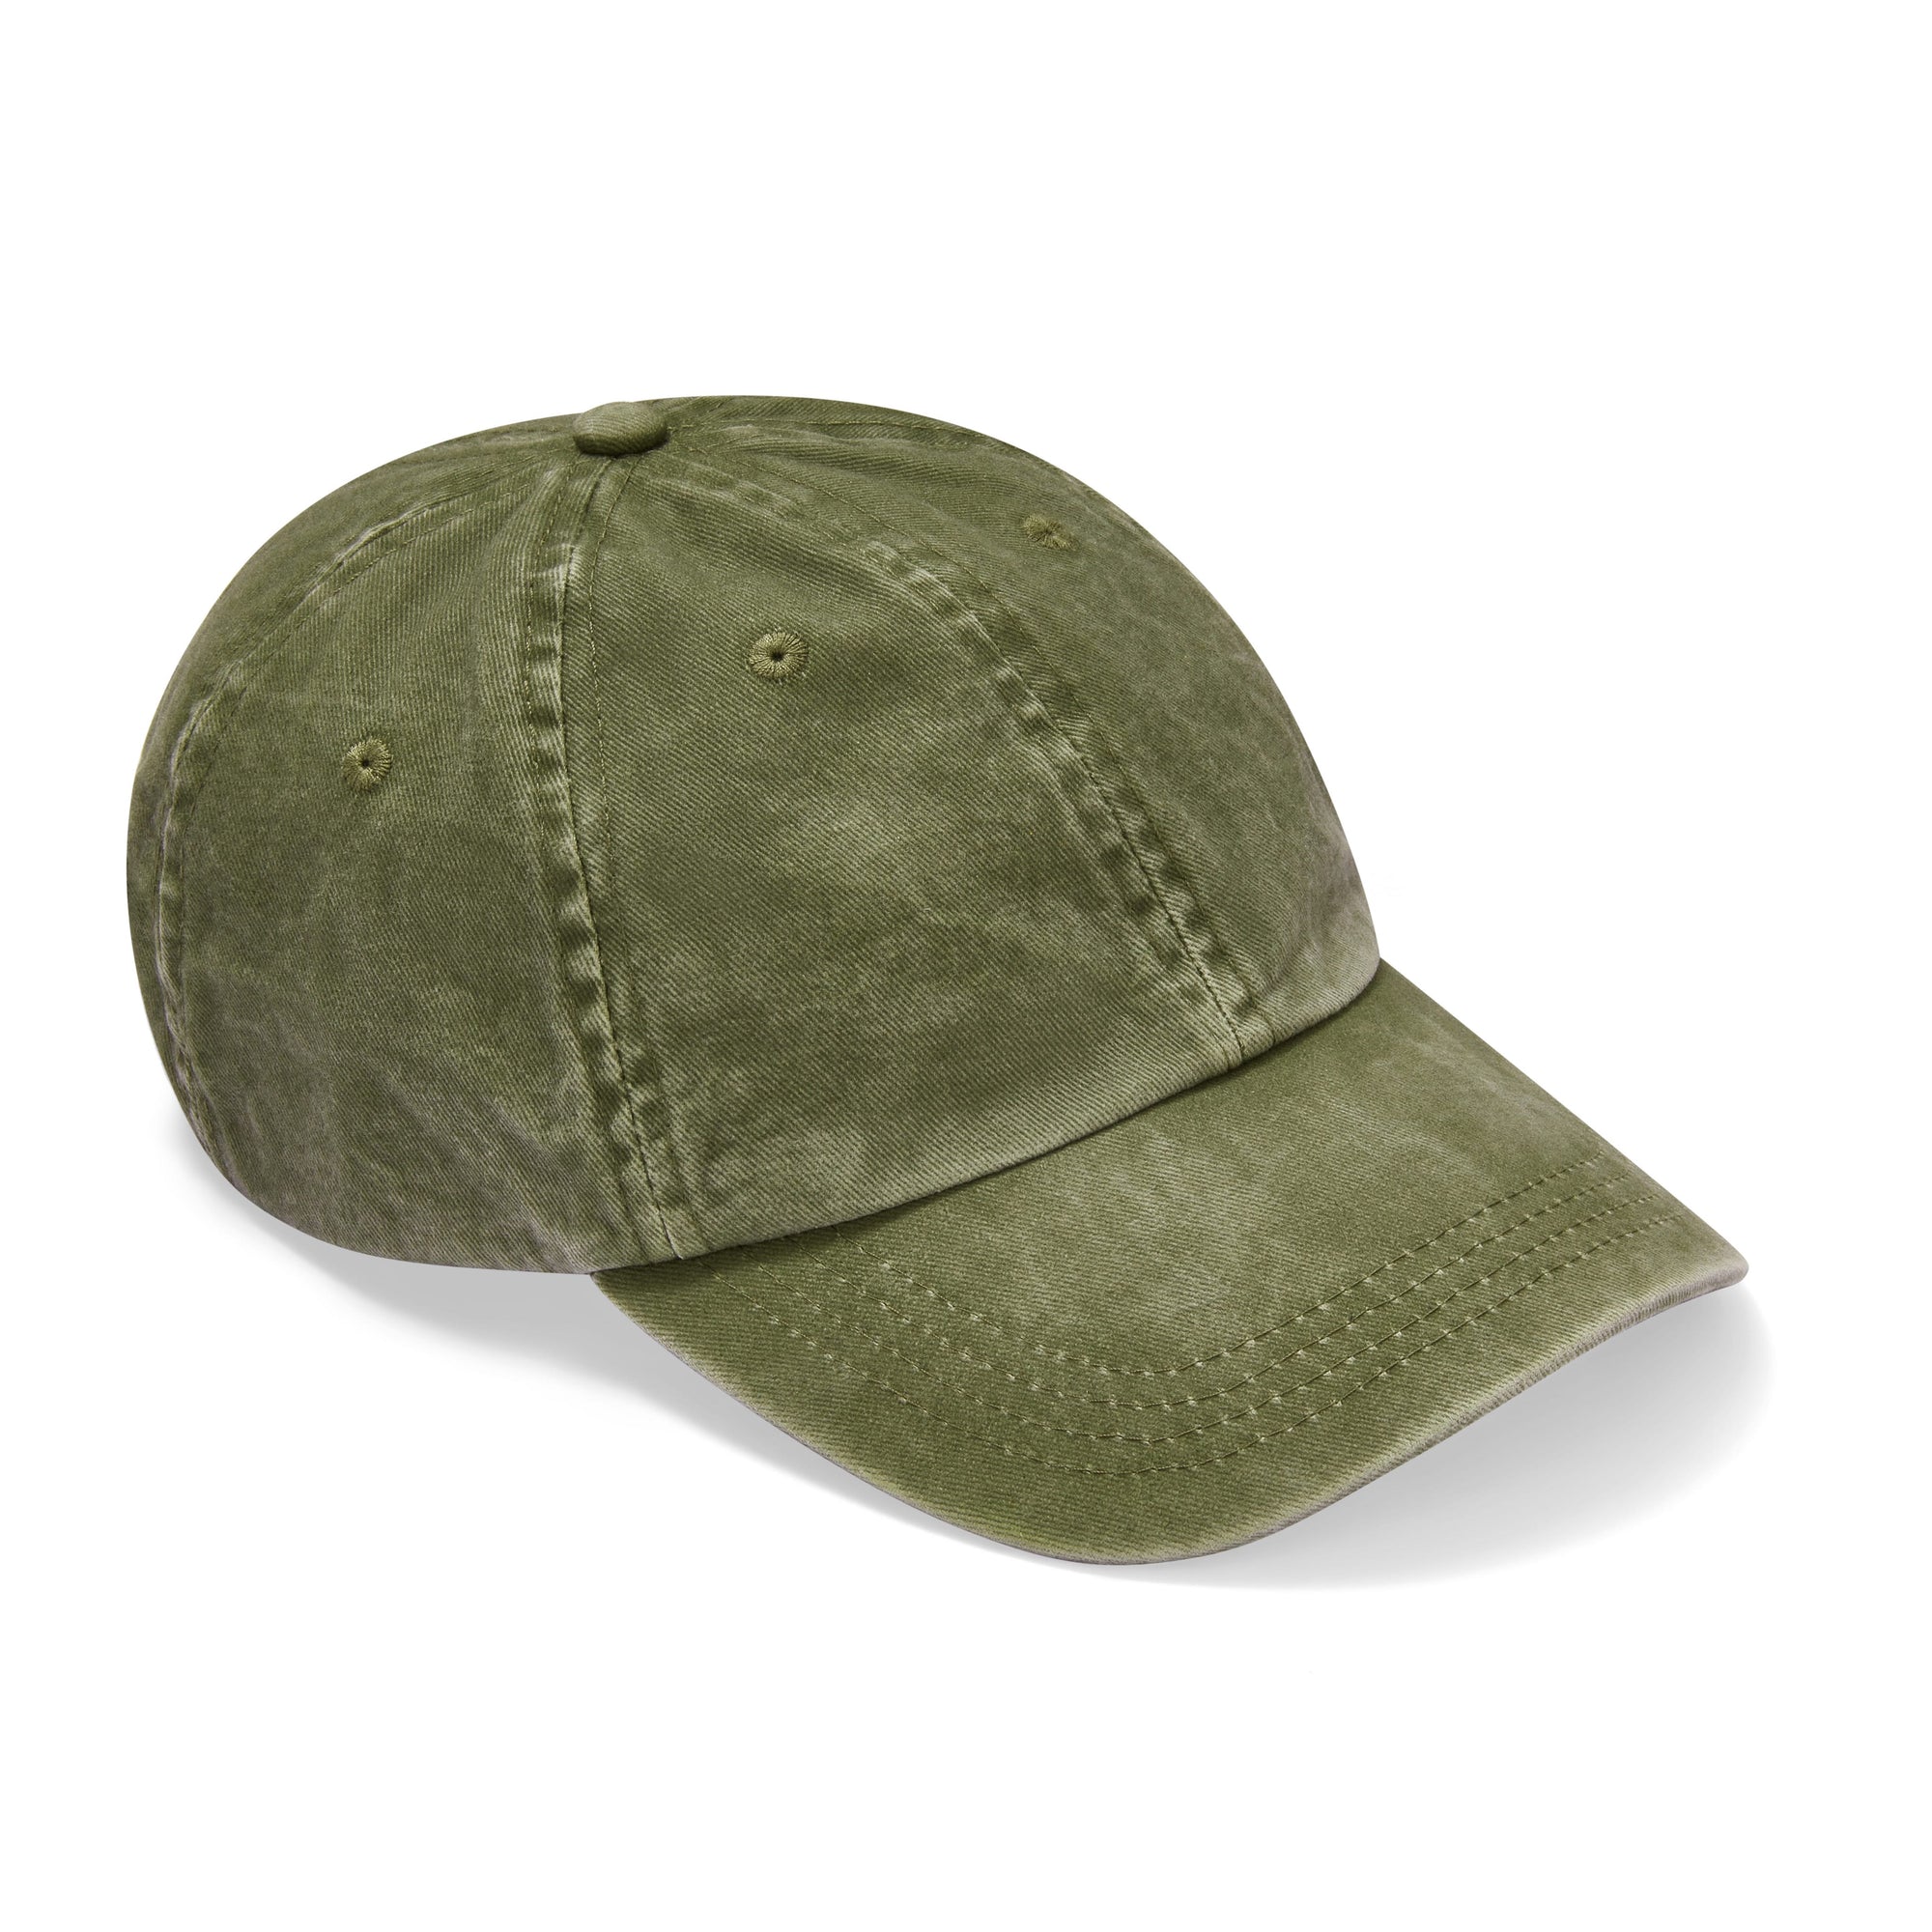 Only Curls Satin Lined Baseball Hat  - Washed Olive - Only Curls